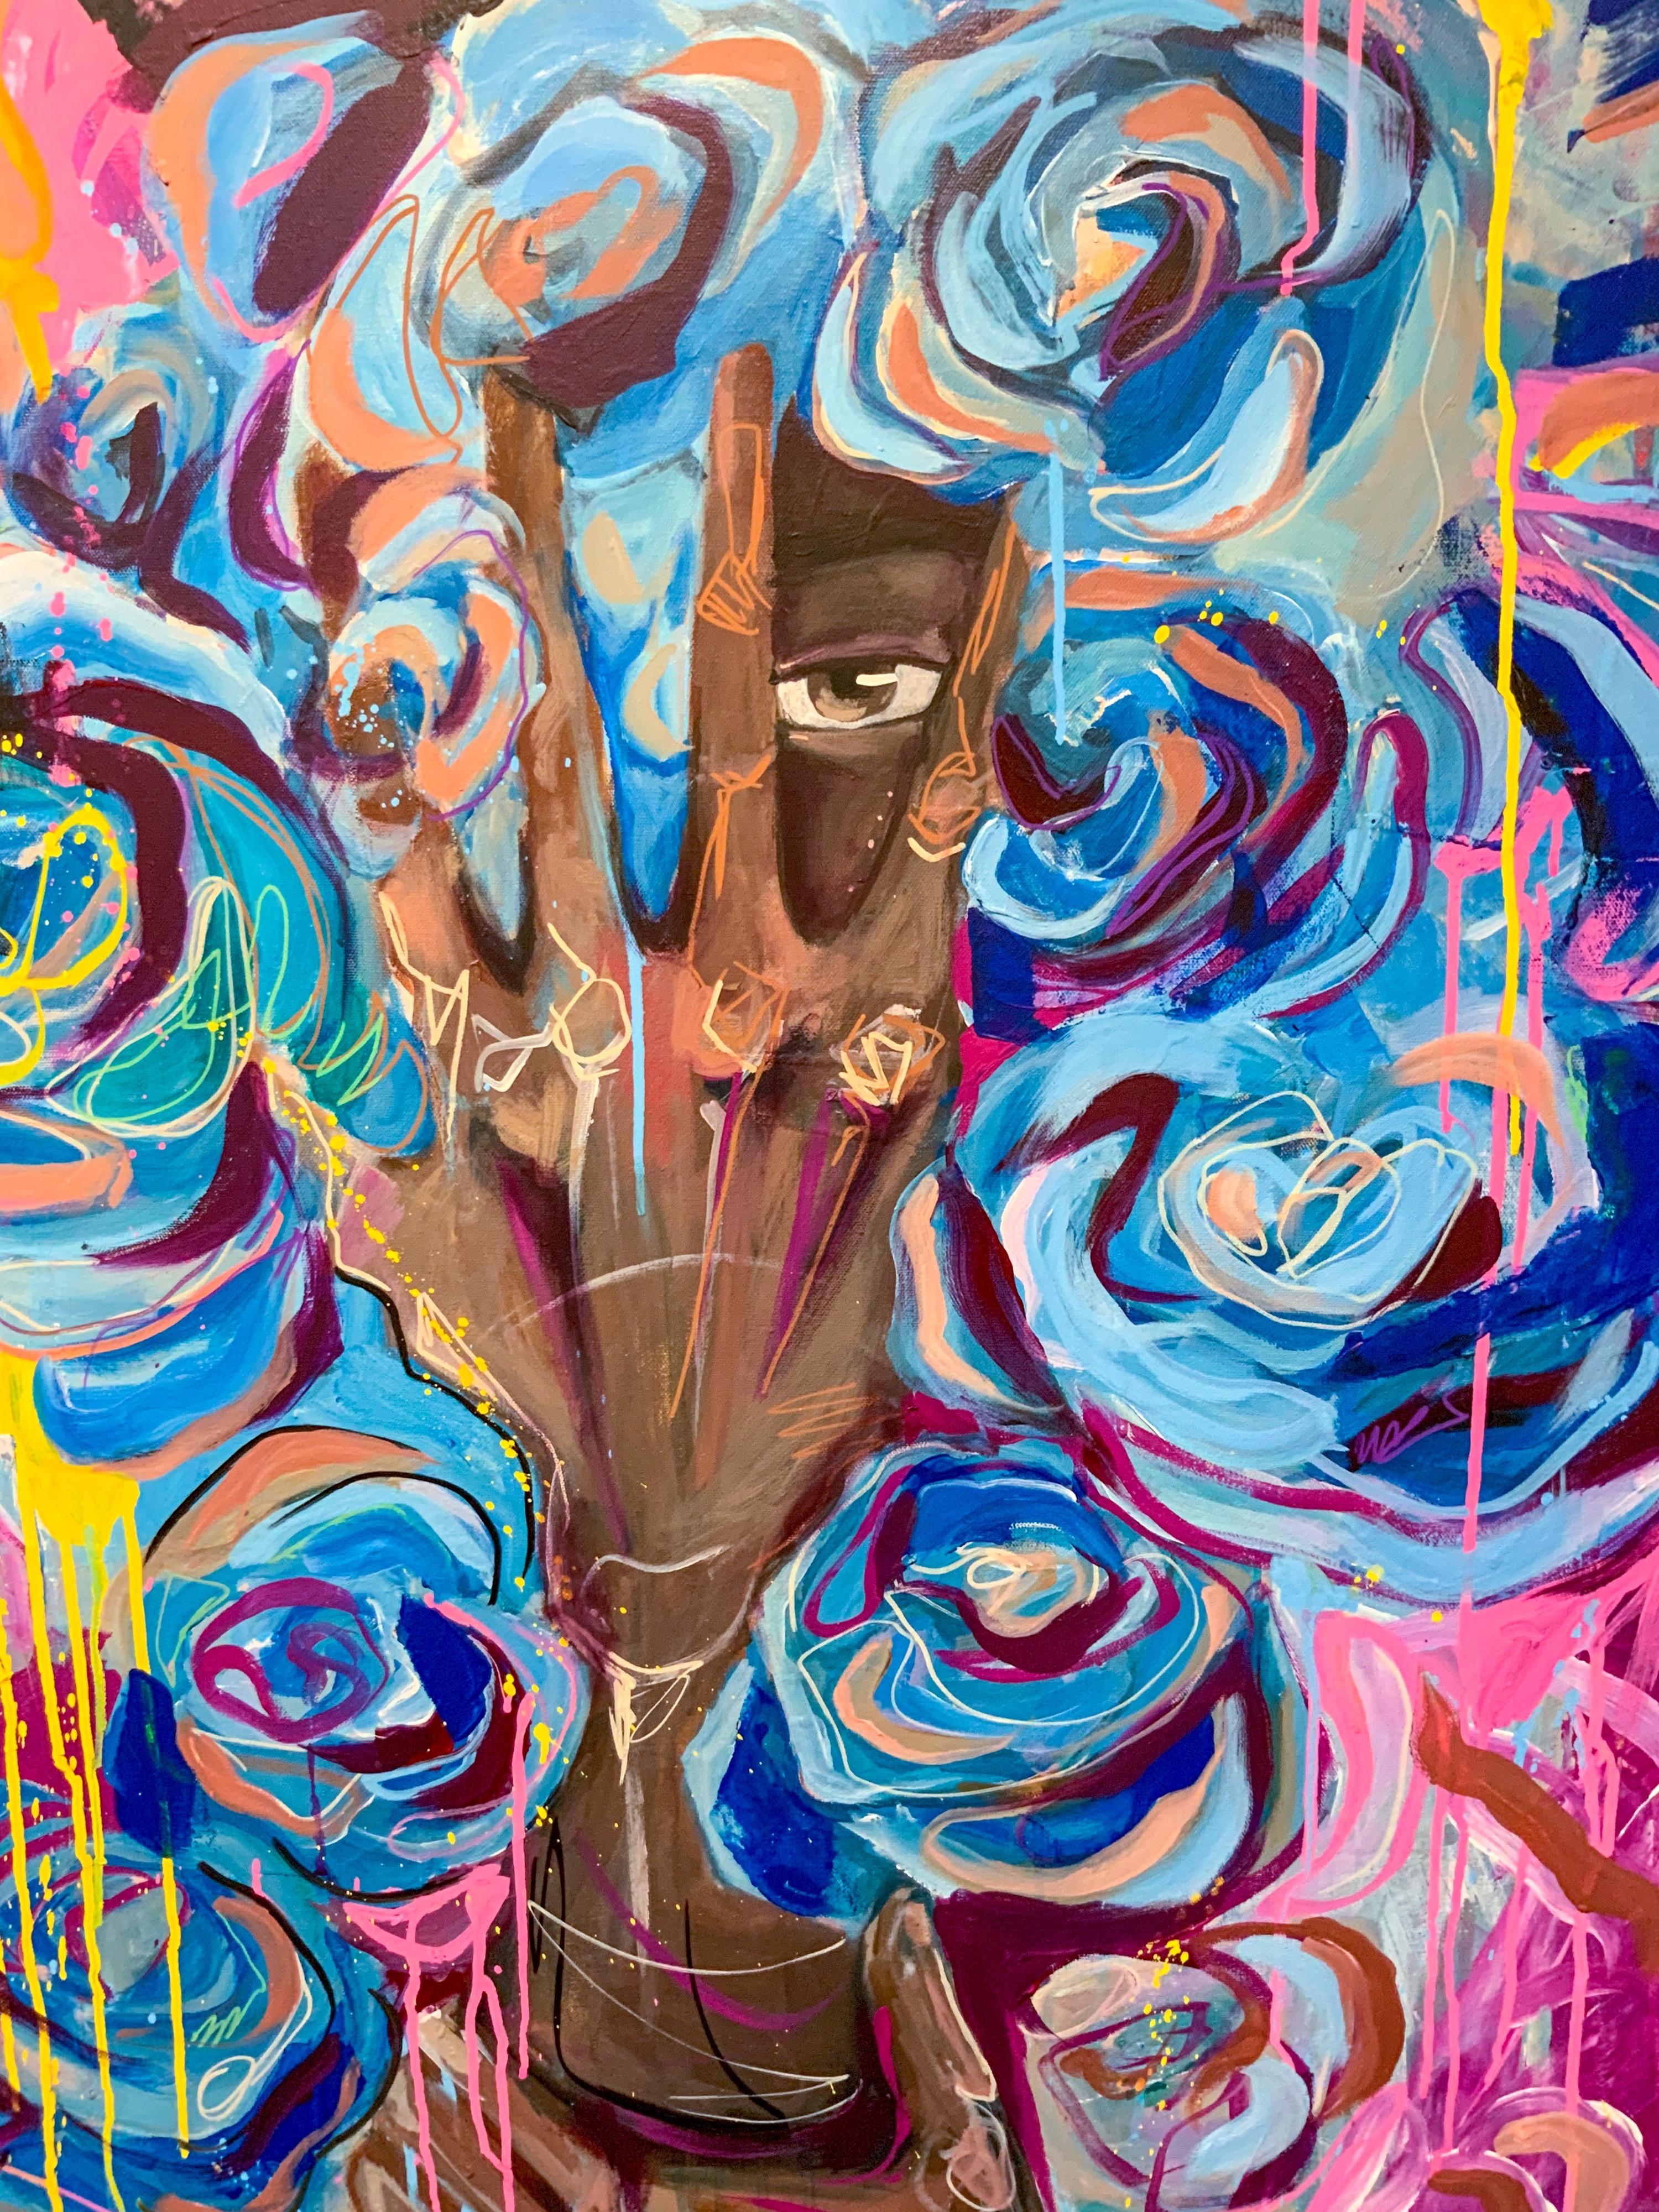 Real Love in Authenticity- Vibrant Abstract Street Art on Canvas in Frame  - Painting by Makayla Binter